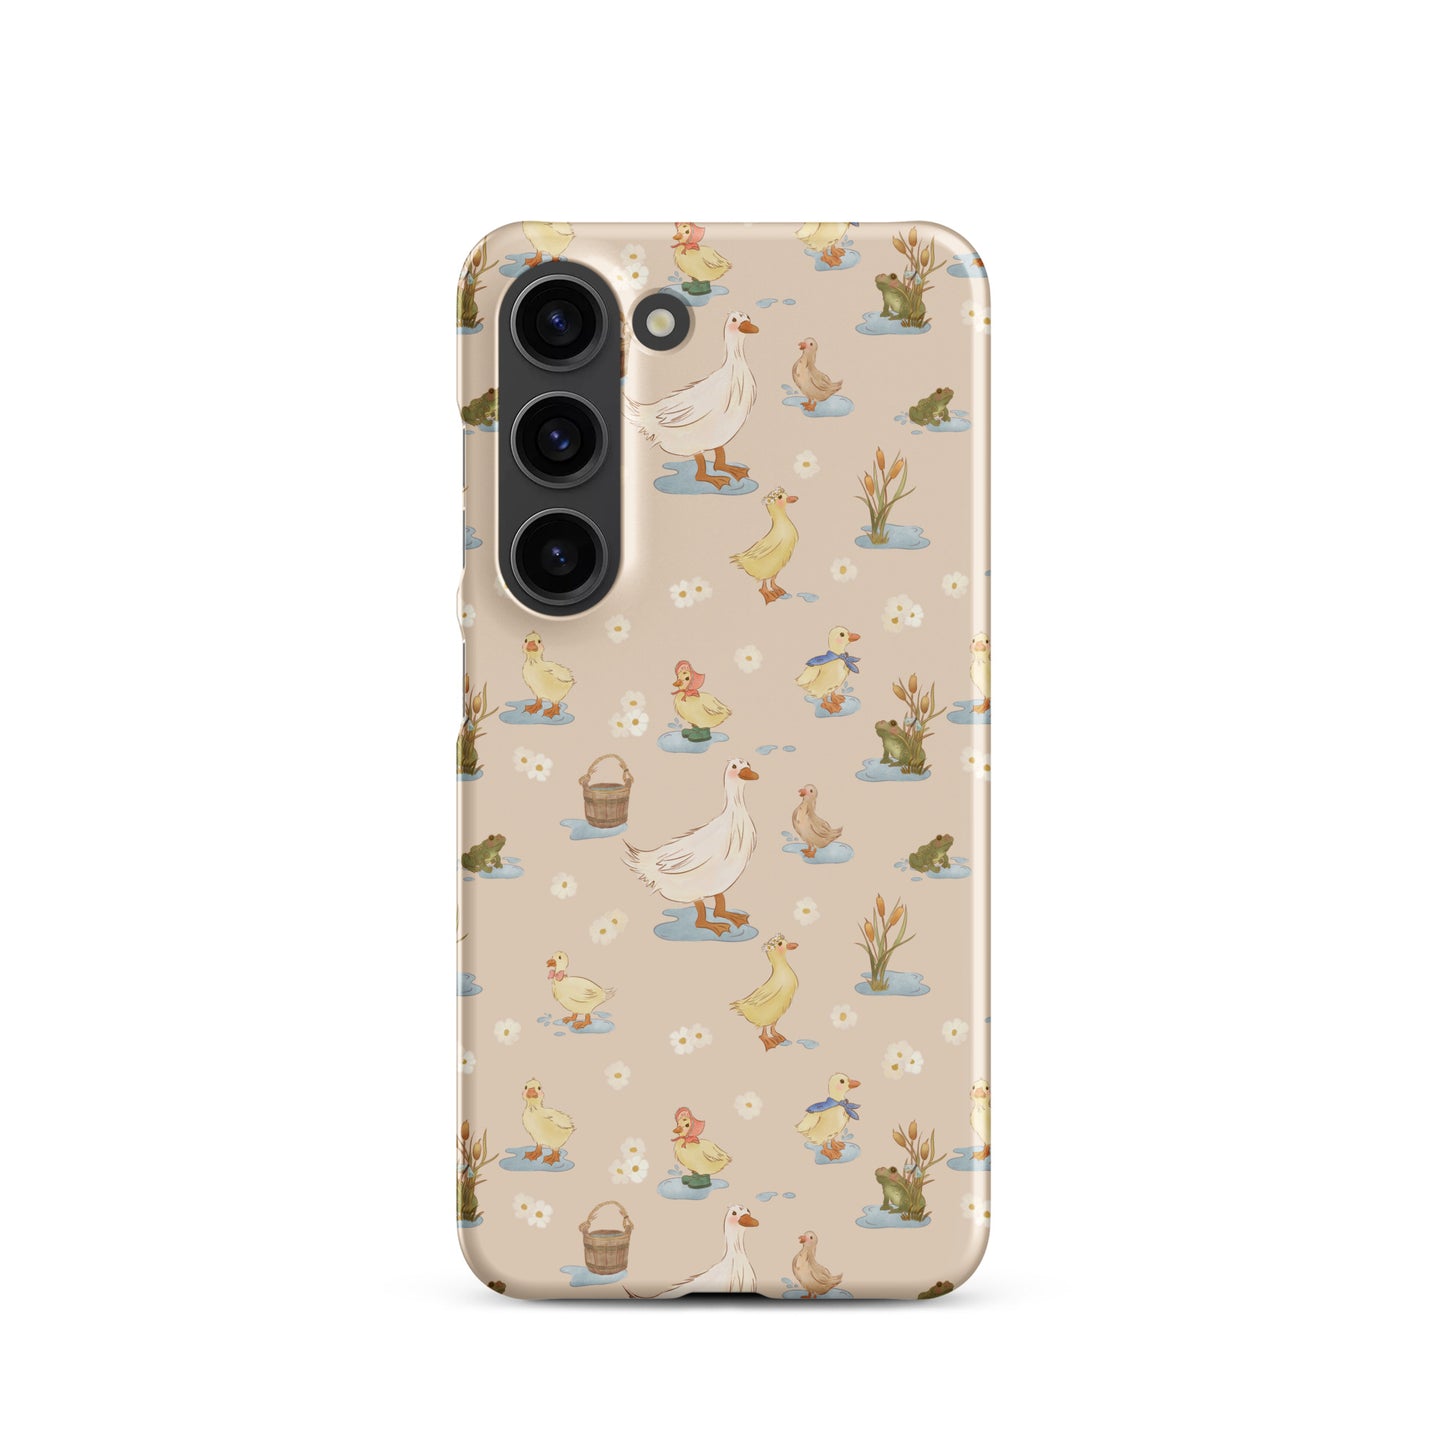 Puddle Ducks : Snap case for Samsung®